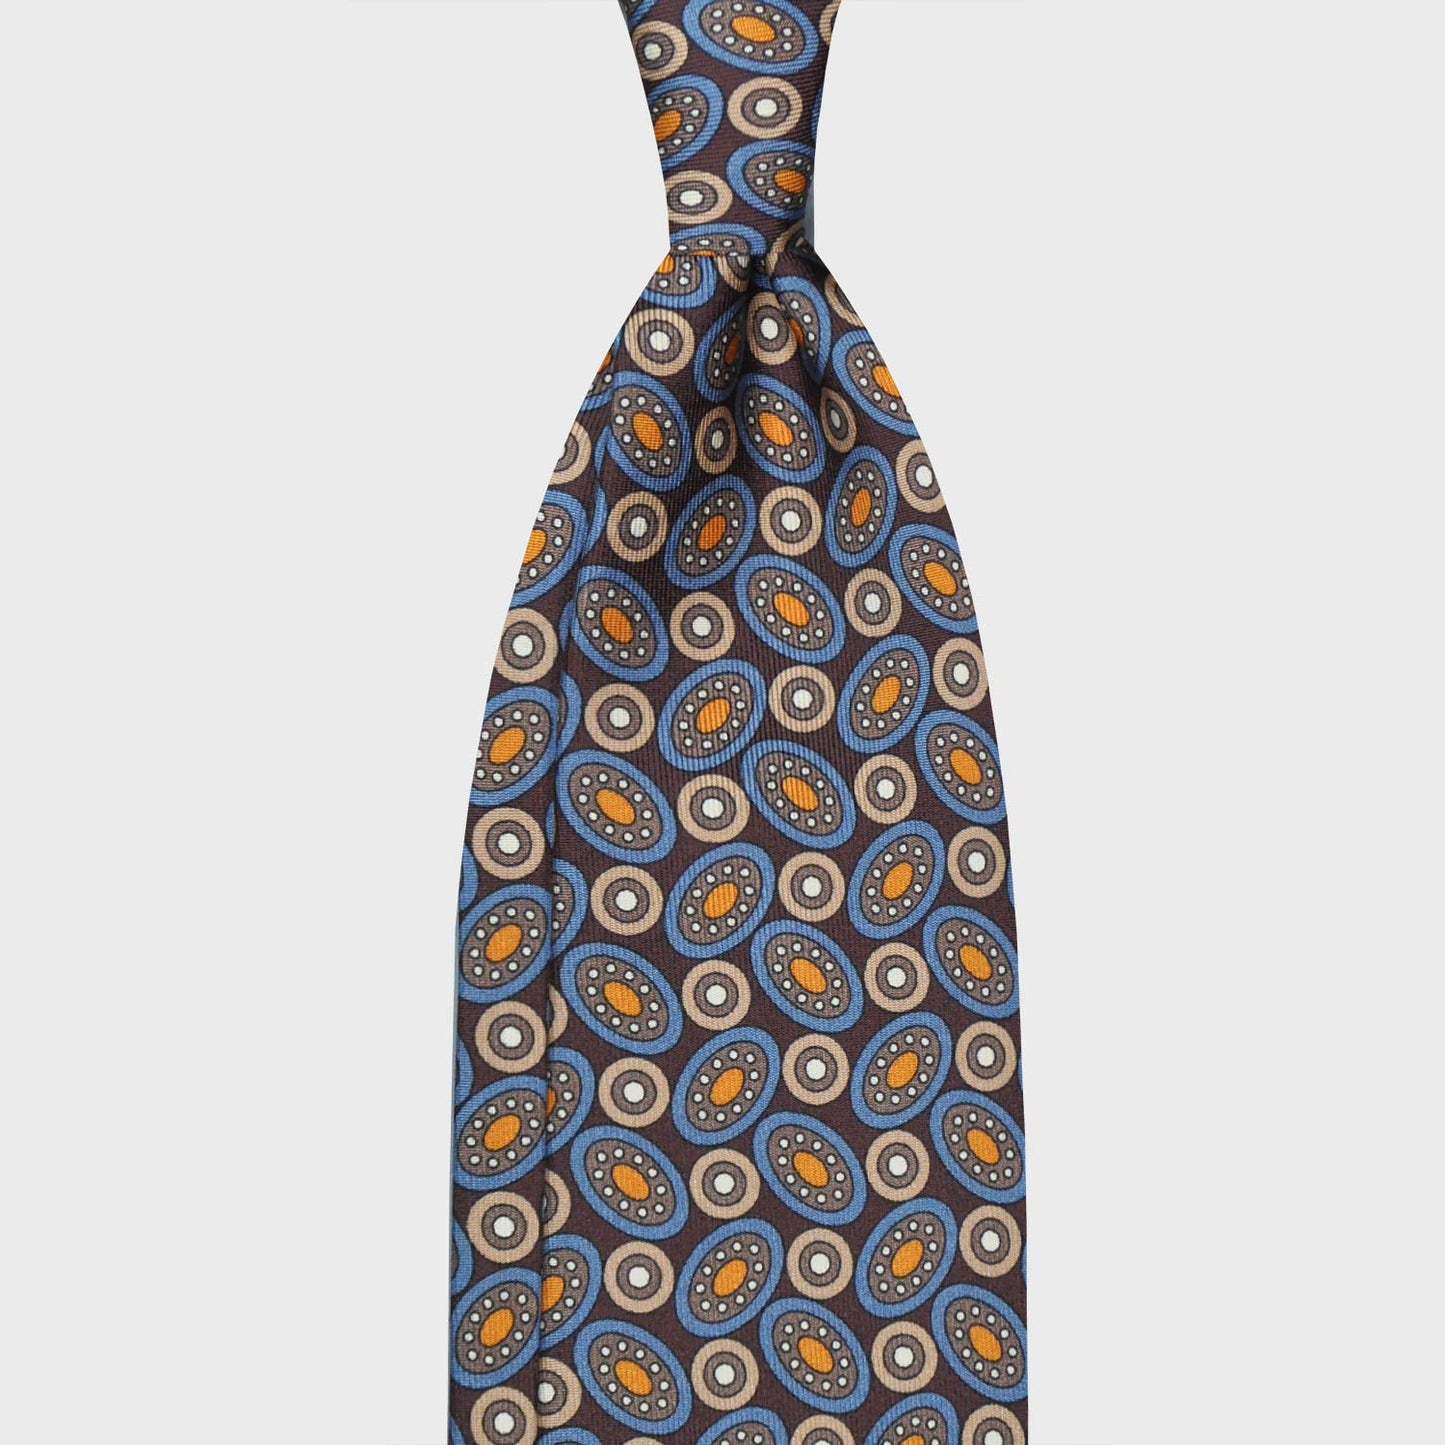 Brown Geometric Planets Fantasy Pattern Silk Tie. Elegant silk tie made with classic geometric planet pattern, coffee brown background, unlined tie 3 folds, handmade tie with a exclusive pattern made by Wools Boutique Uomo